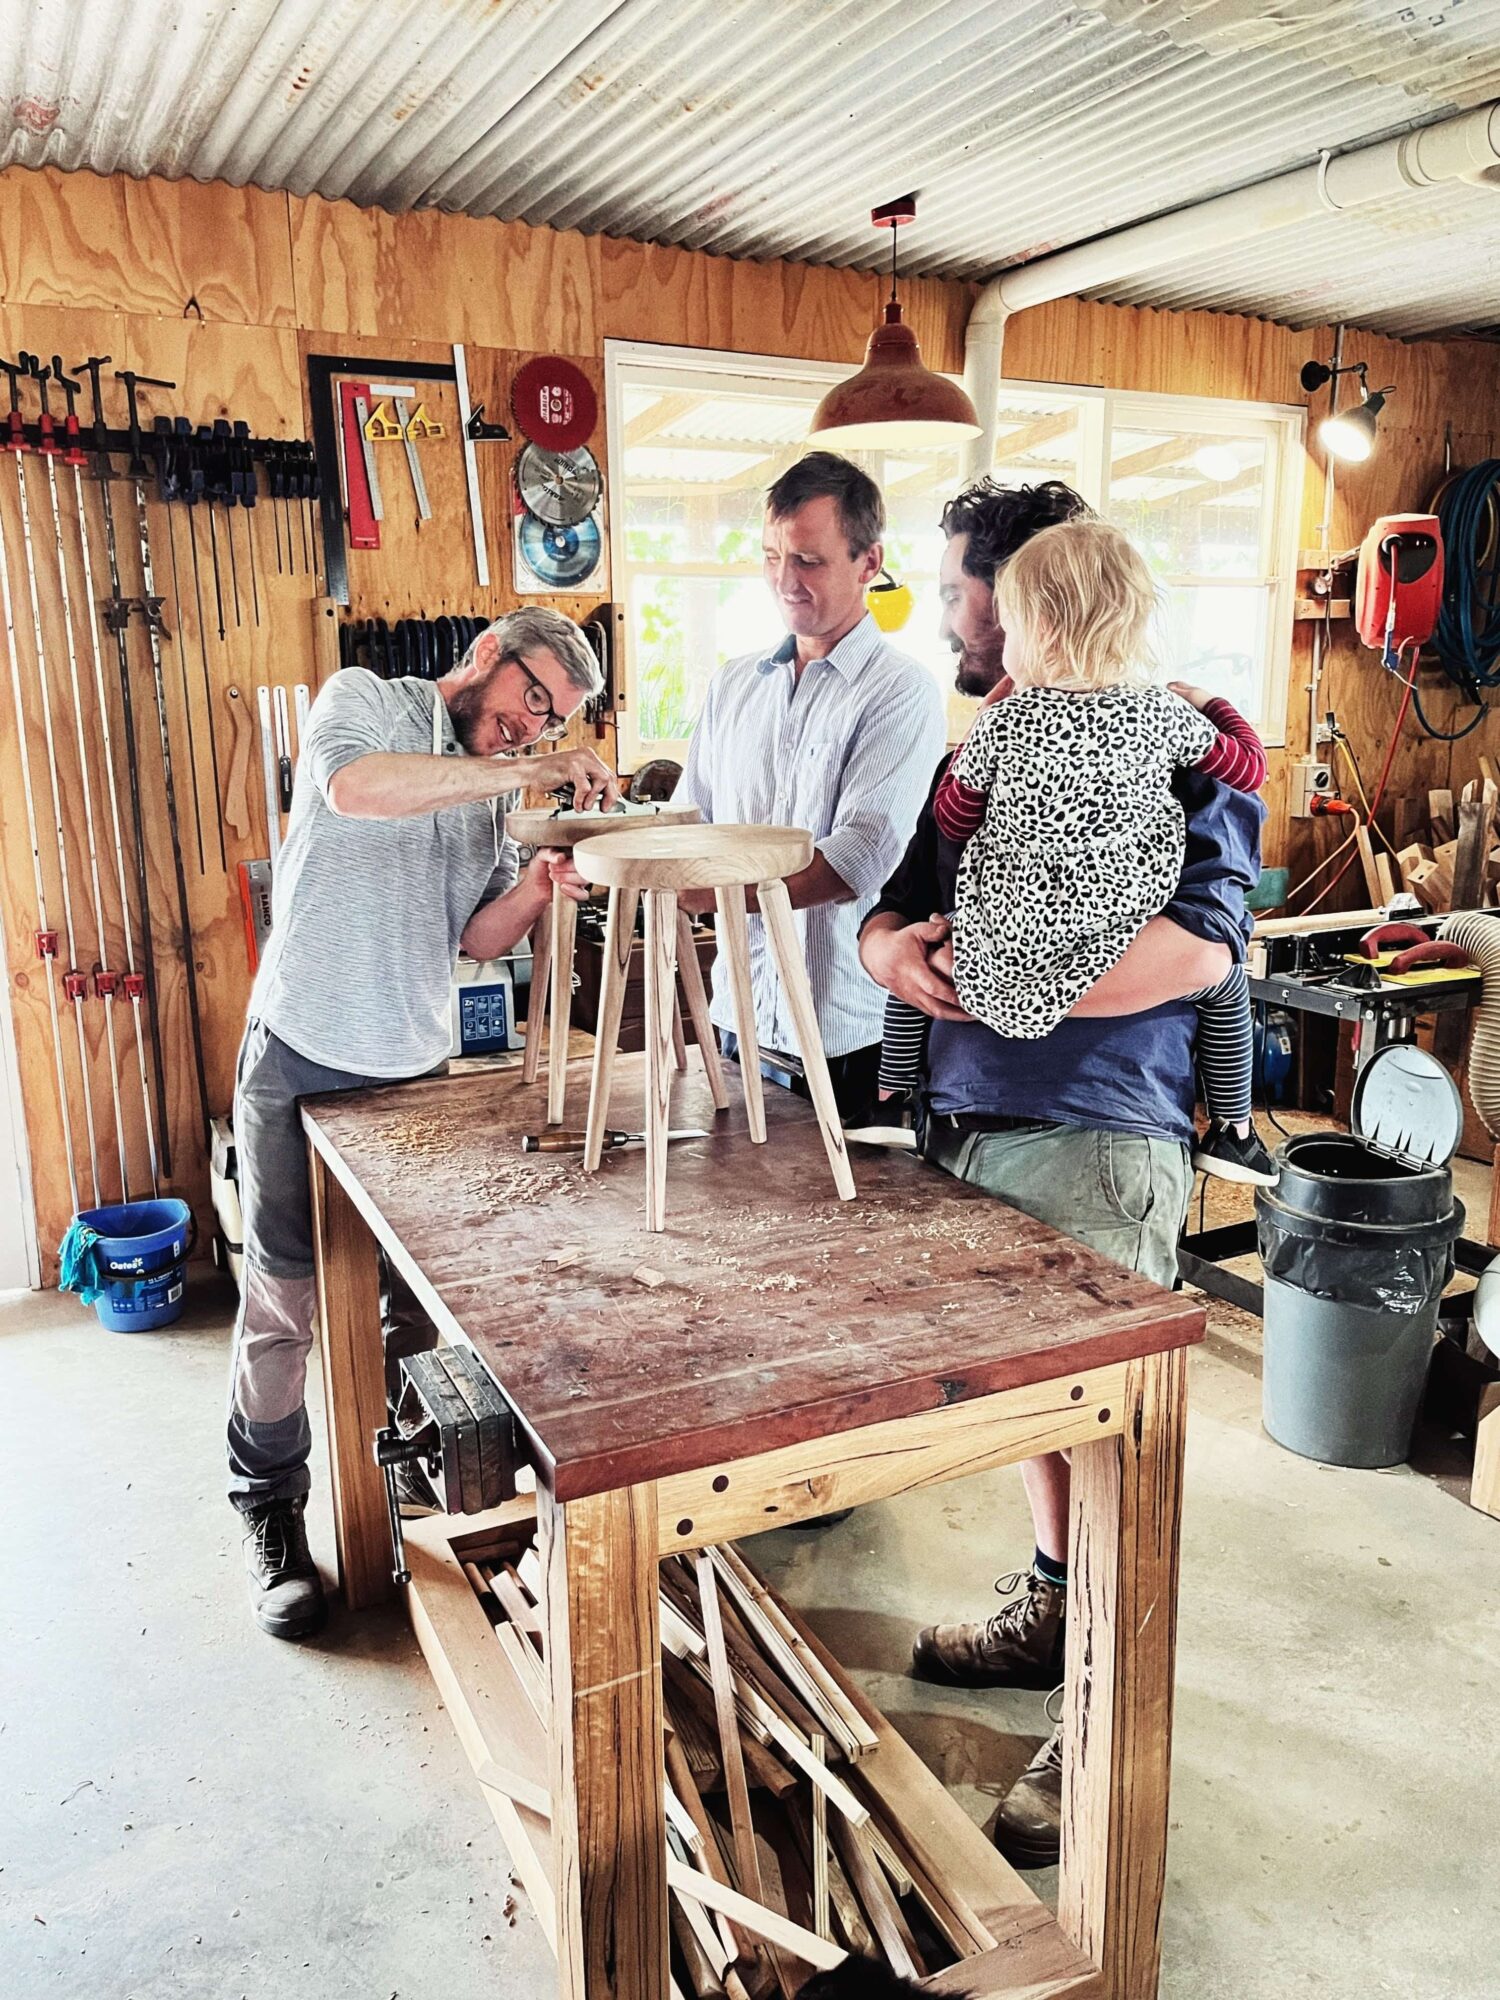 Participants working to finish stools